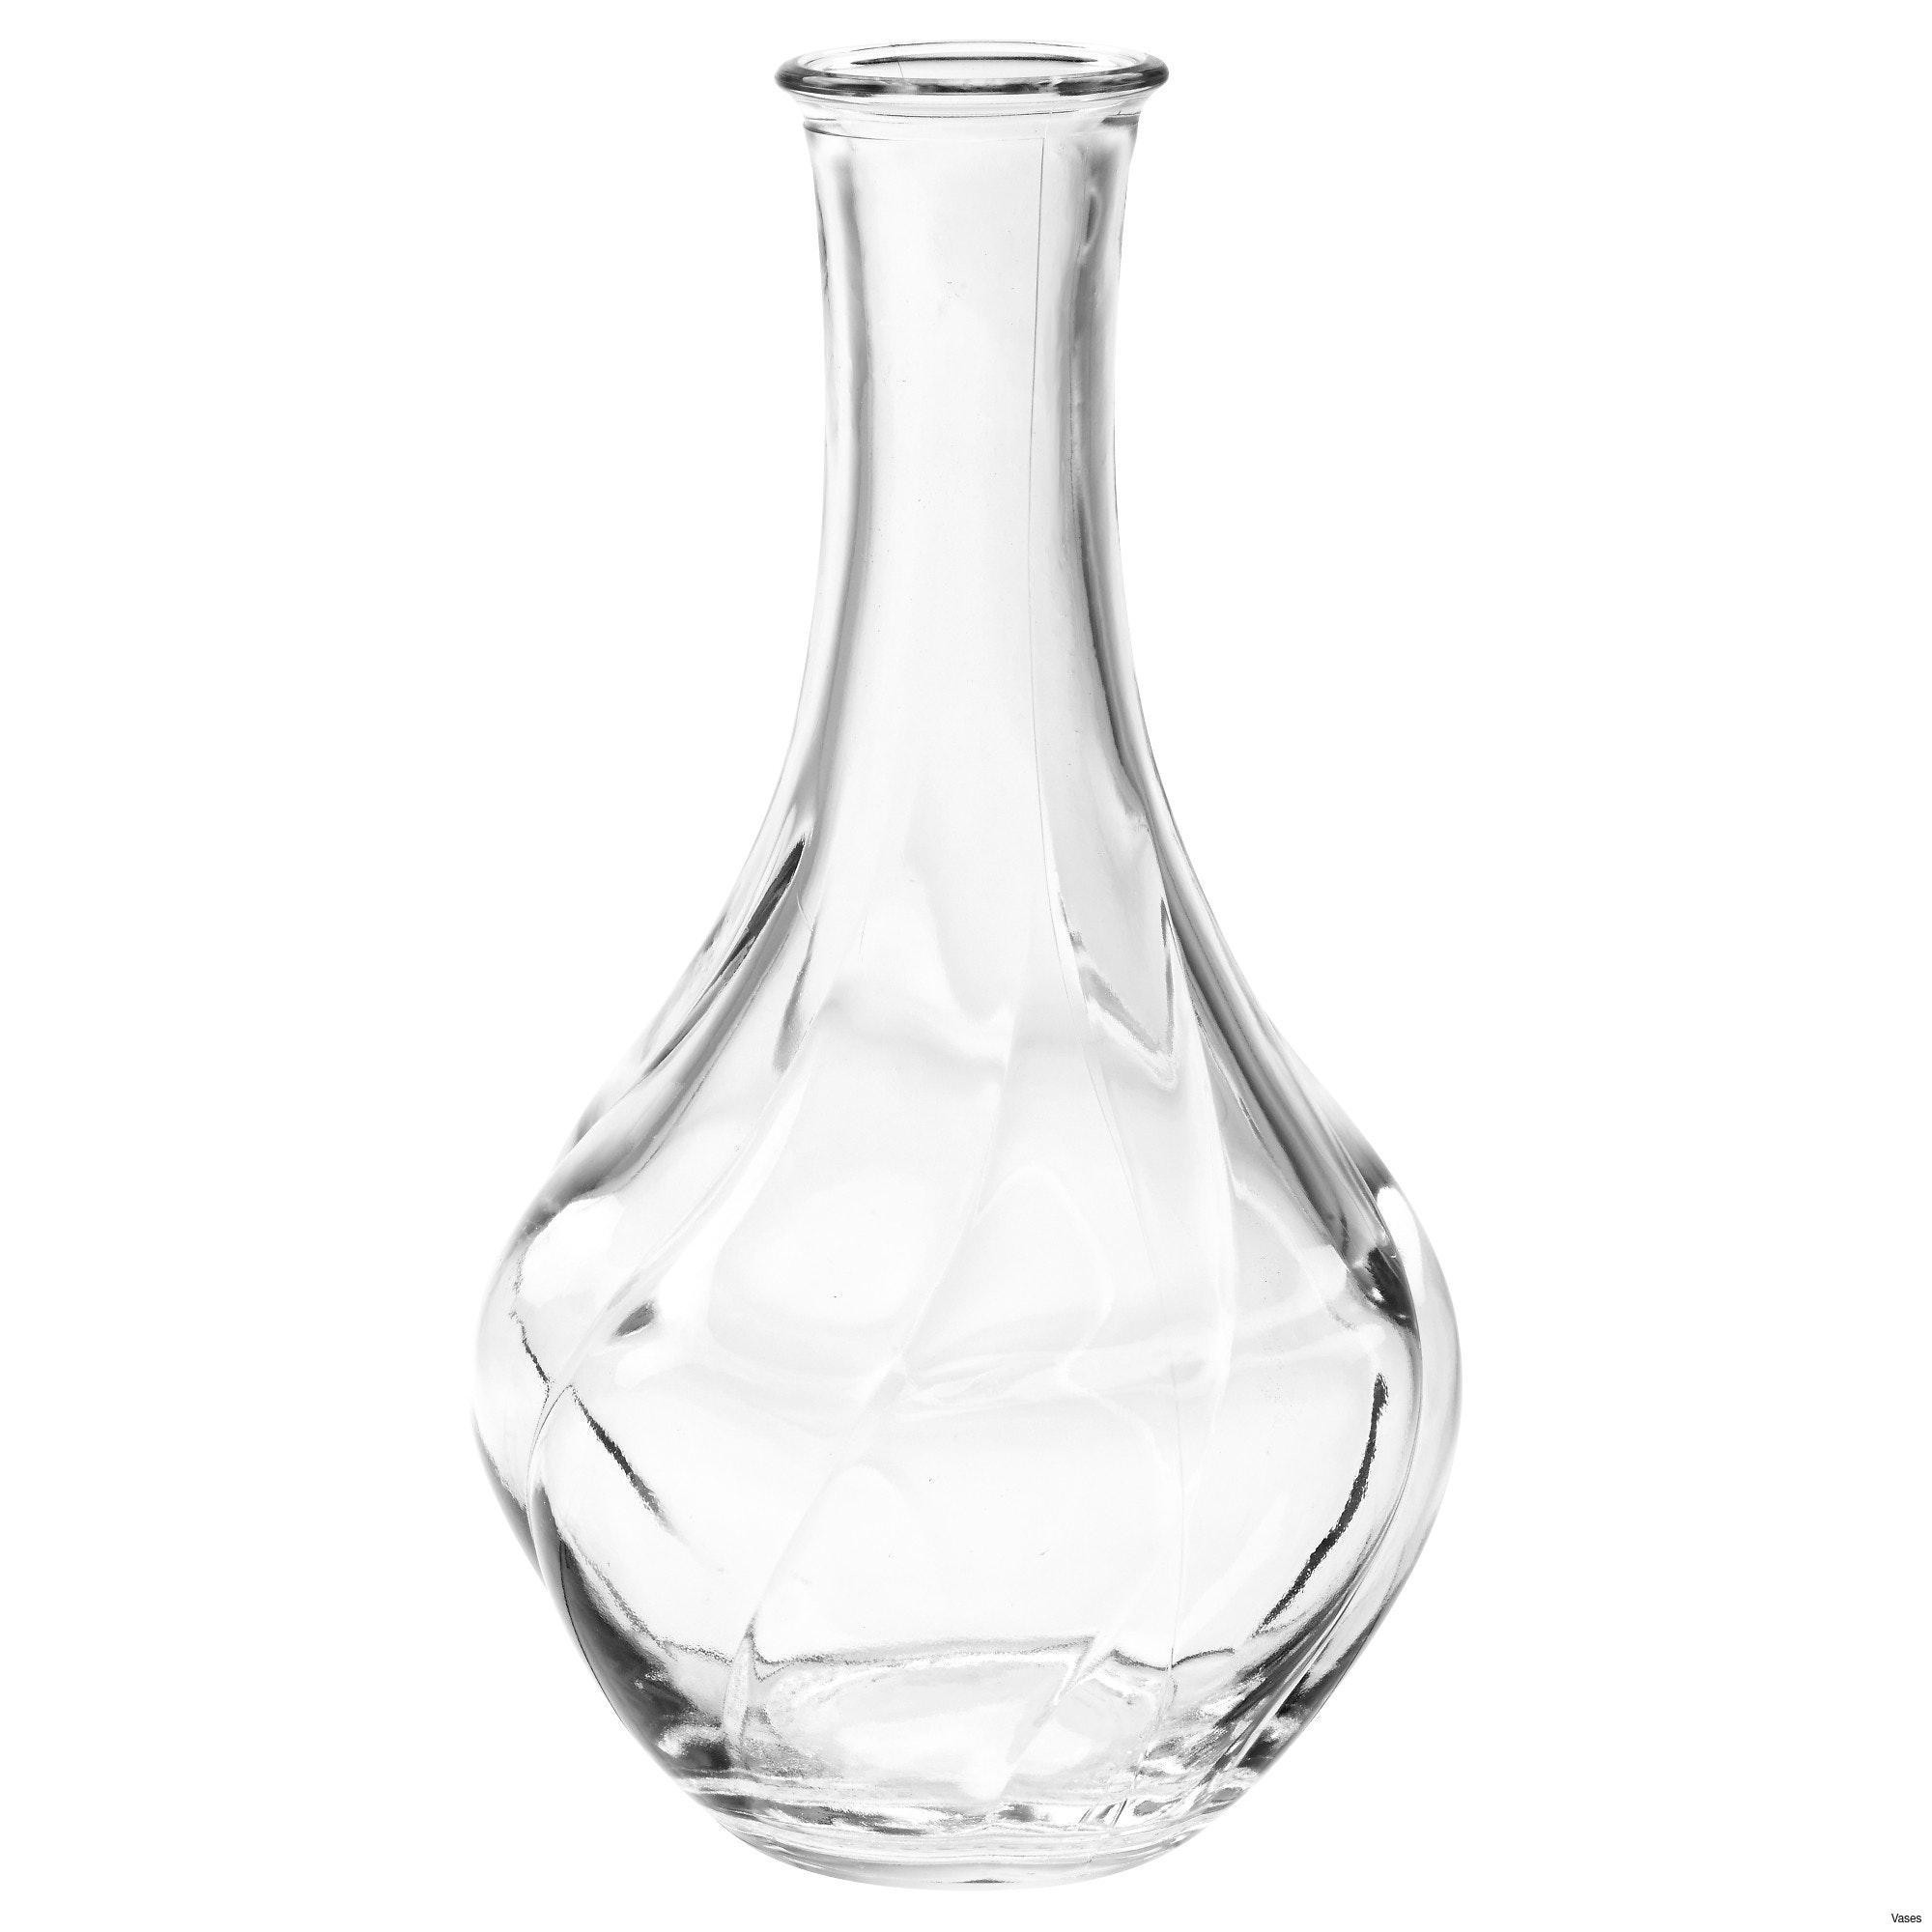 antique venetian glass vases of heavy glass vase gallery living room glass vases fresh clear vase 0d throughout heavy glass vase gallery living room glass vases fresh clear vase 0d tags amazing and of